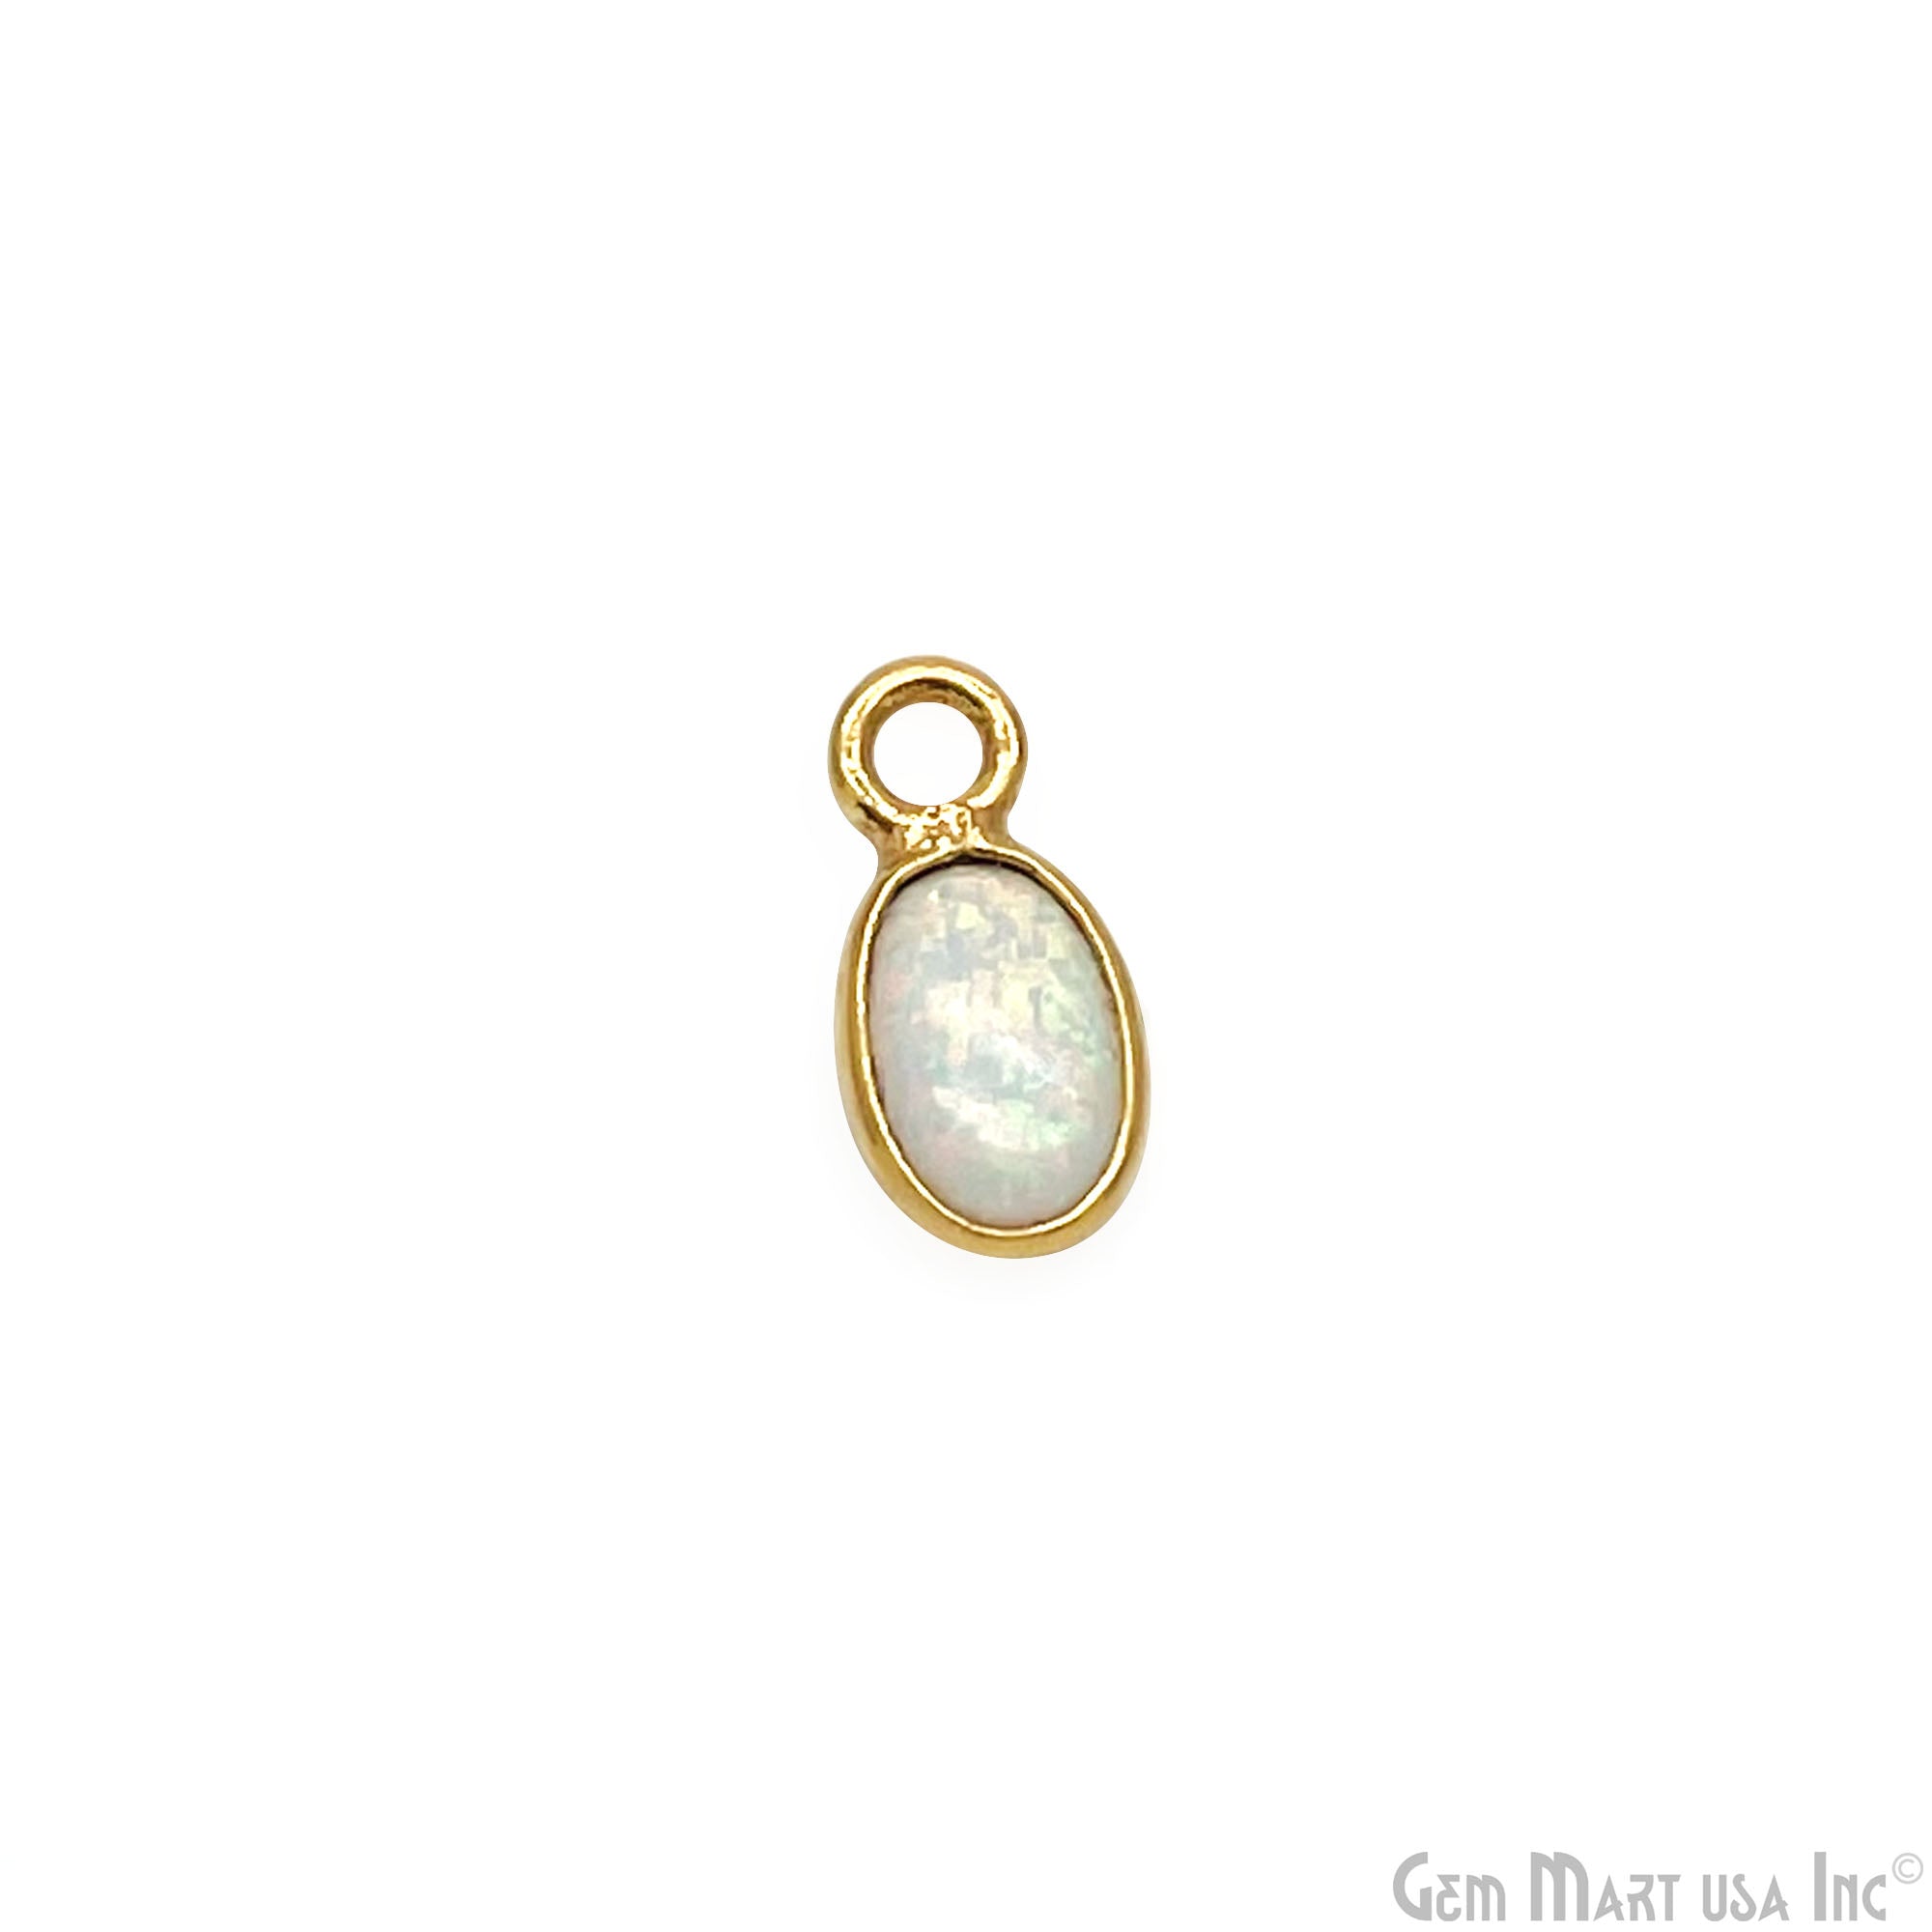 Oval 6x4mm Single Bail Gold Plated Bezel Gemstone Connector